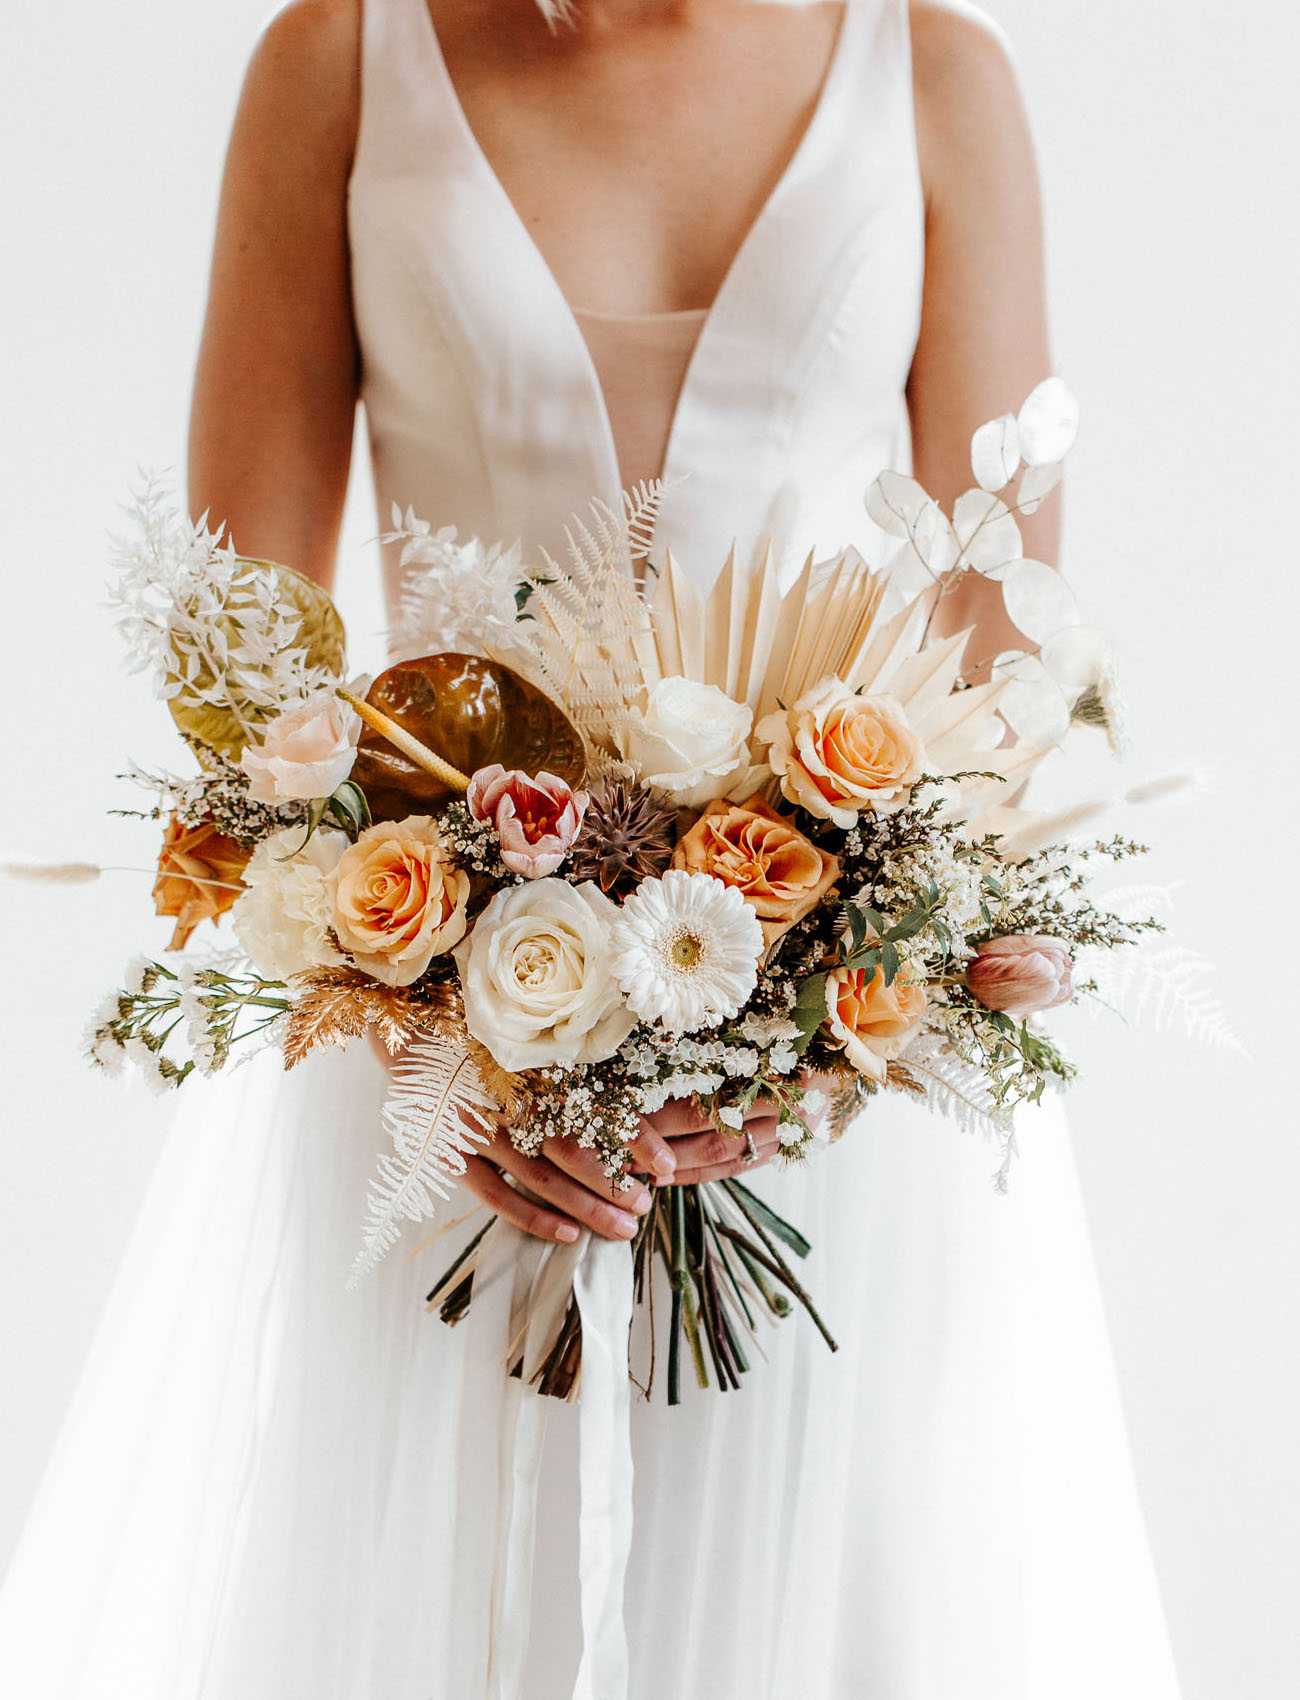 The wedding bouquet was done with peachy and pink blooms, fronds, greenery and lots of catchy details